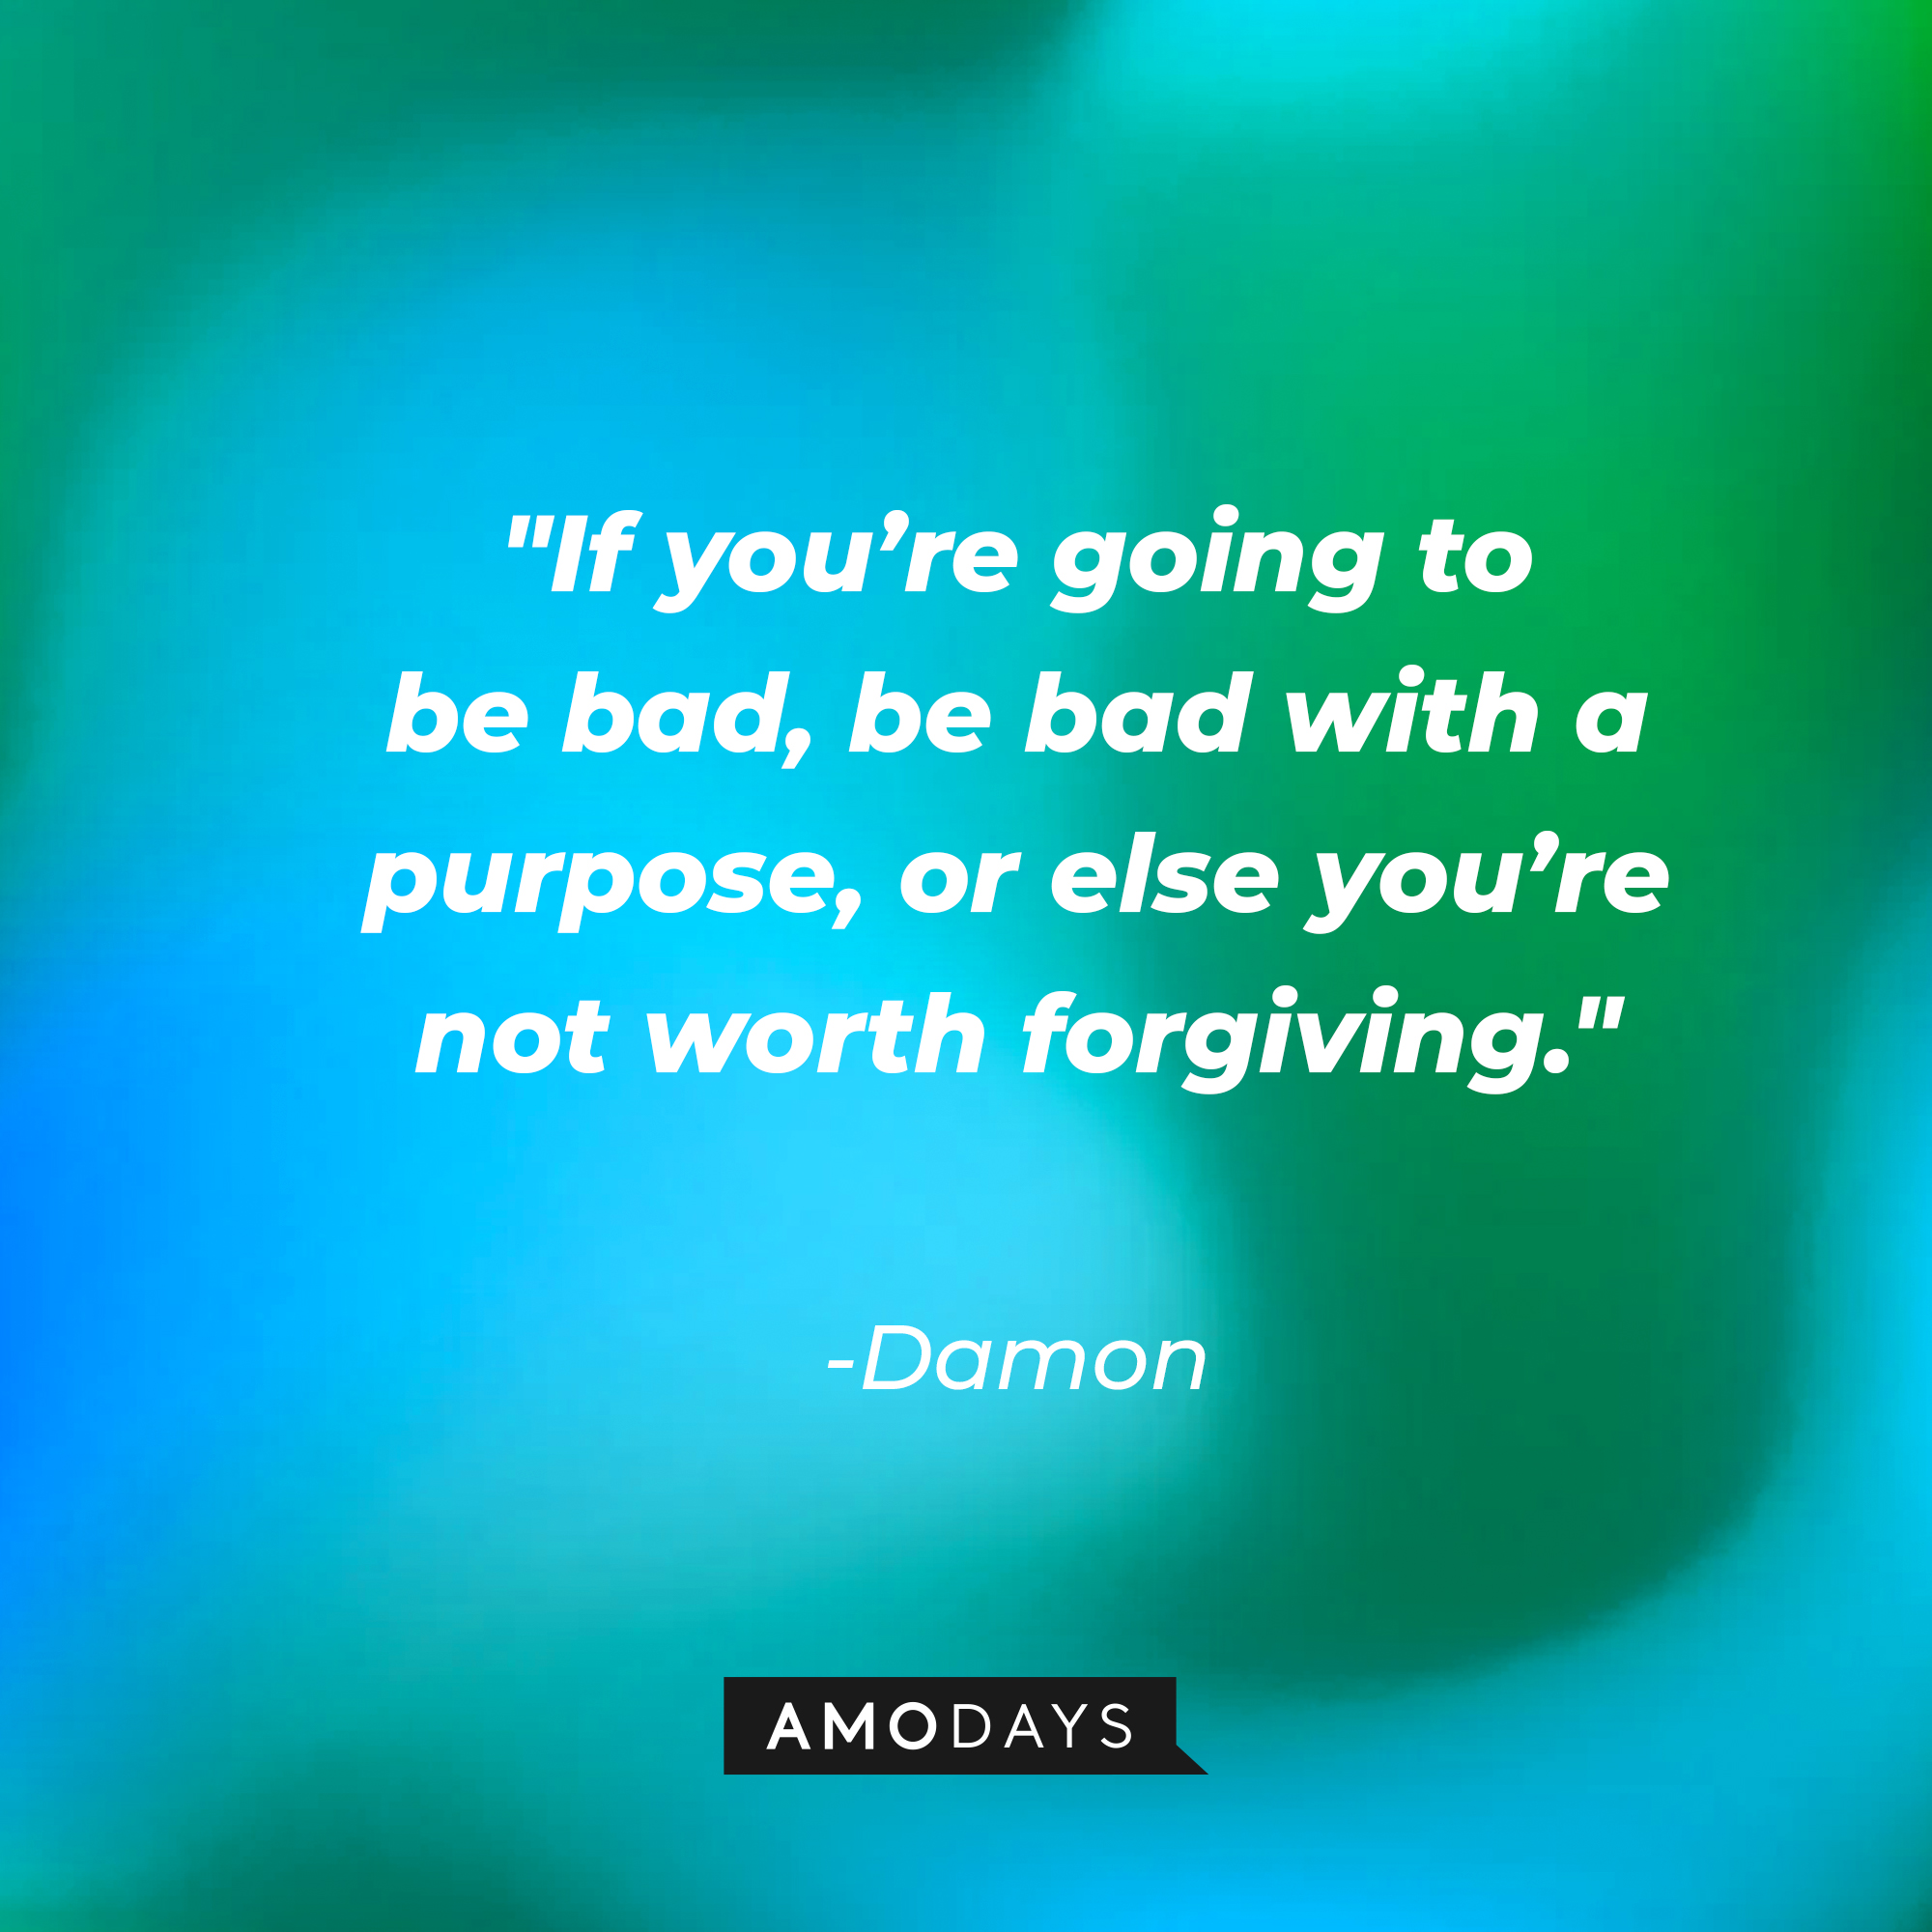 Damon's quote: "If you're going to be bad, be bad with a purpose, or else you're not worth forgiving." | Source: Amodays